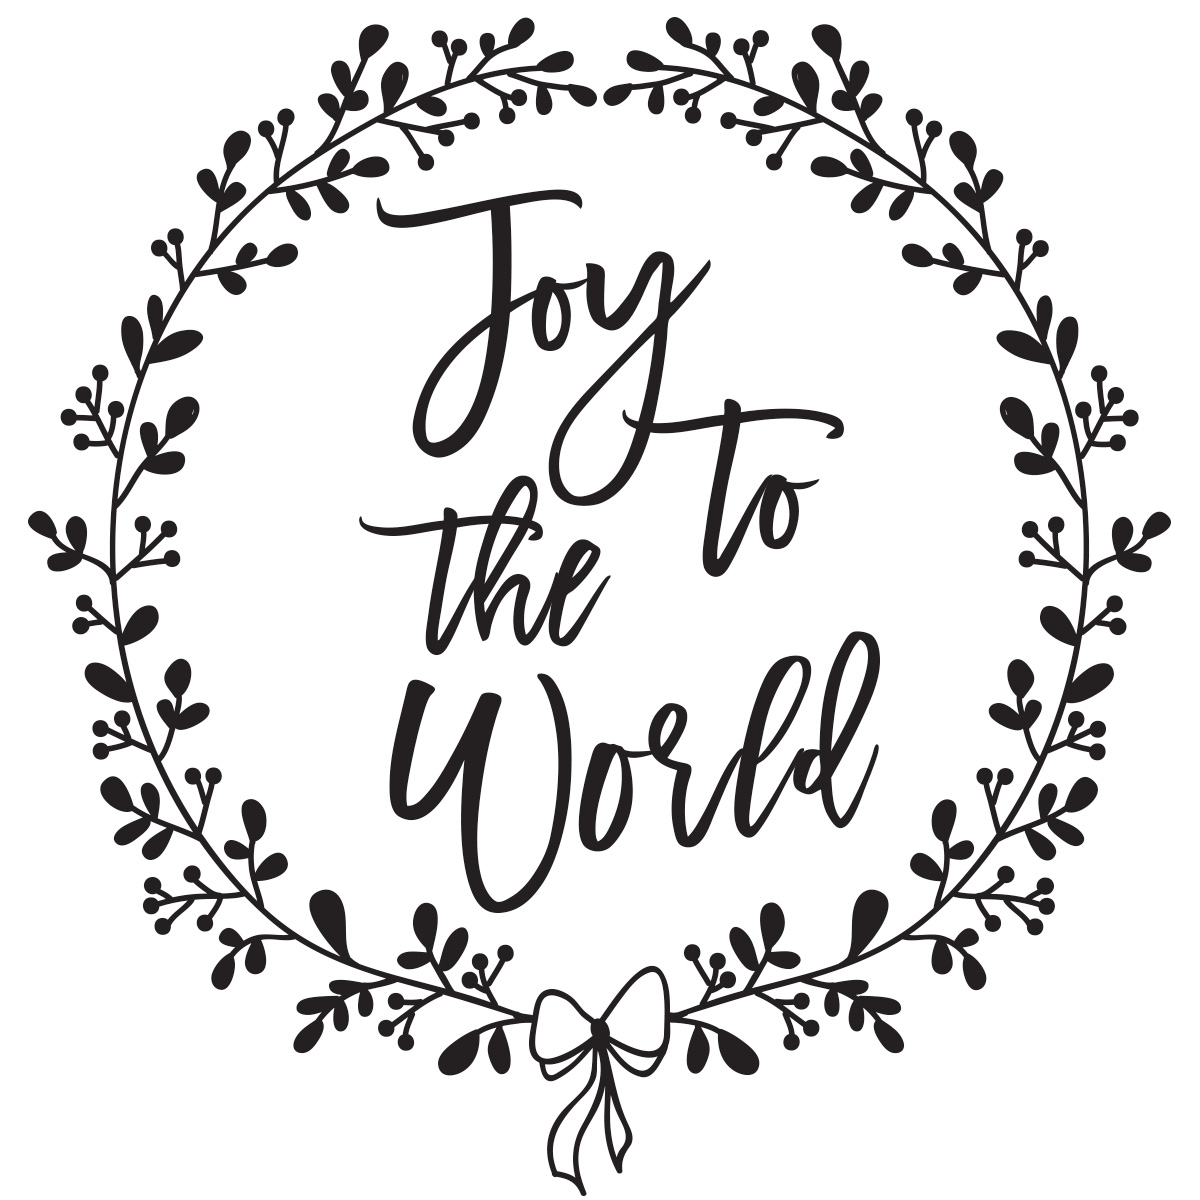 joy to the world clipart black and white 10 free Cliparts | Download ...